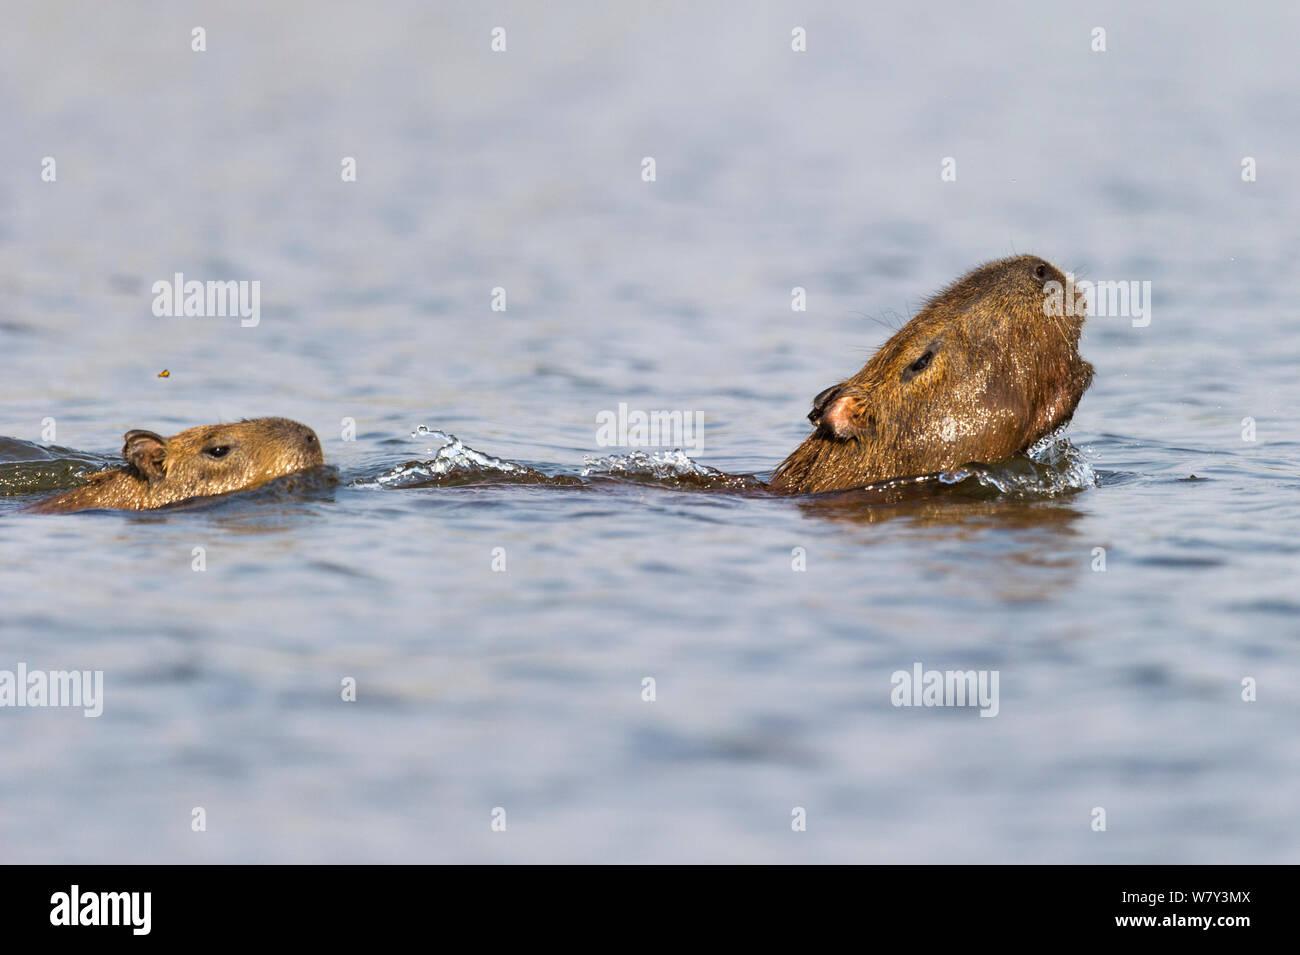 Female Capybara (Hydrochoerus hydrochaeris) swimming with young and alarm calling after escaping a Jaguar attack (Panthera onca palustris) in a lagoon off the Paraguay River, Taiama Ecological Reserve, Pantanal, Brazil, South America. Stock Photo